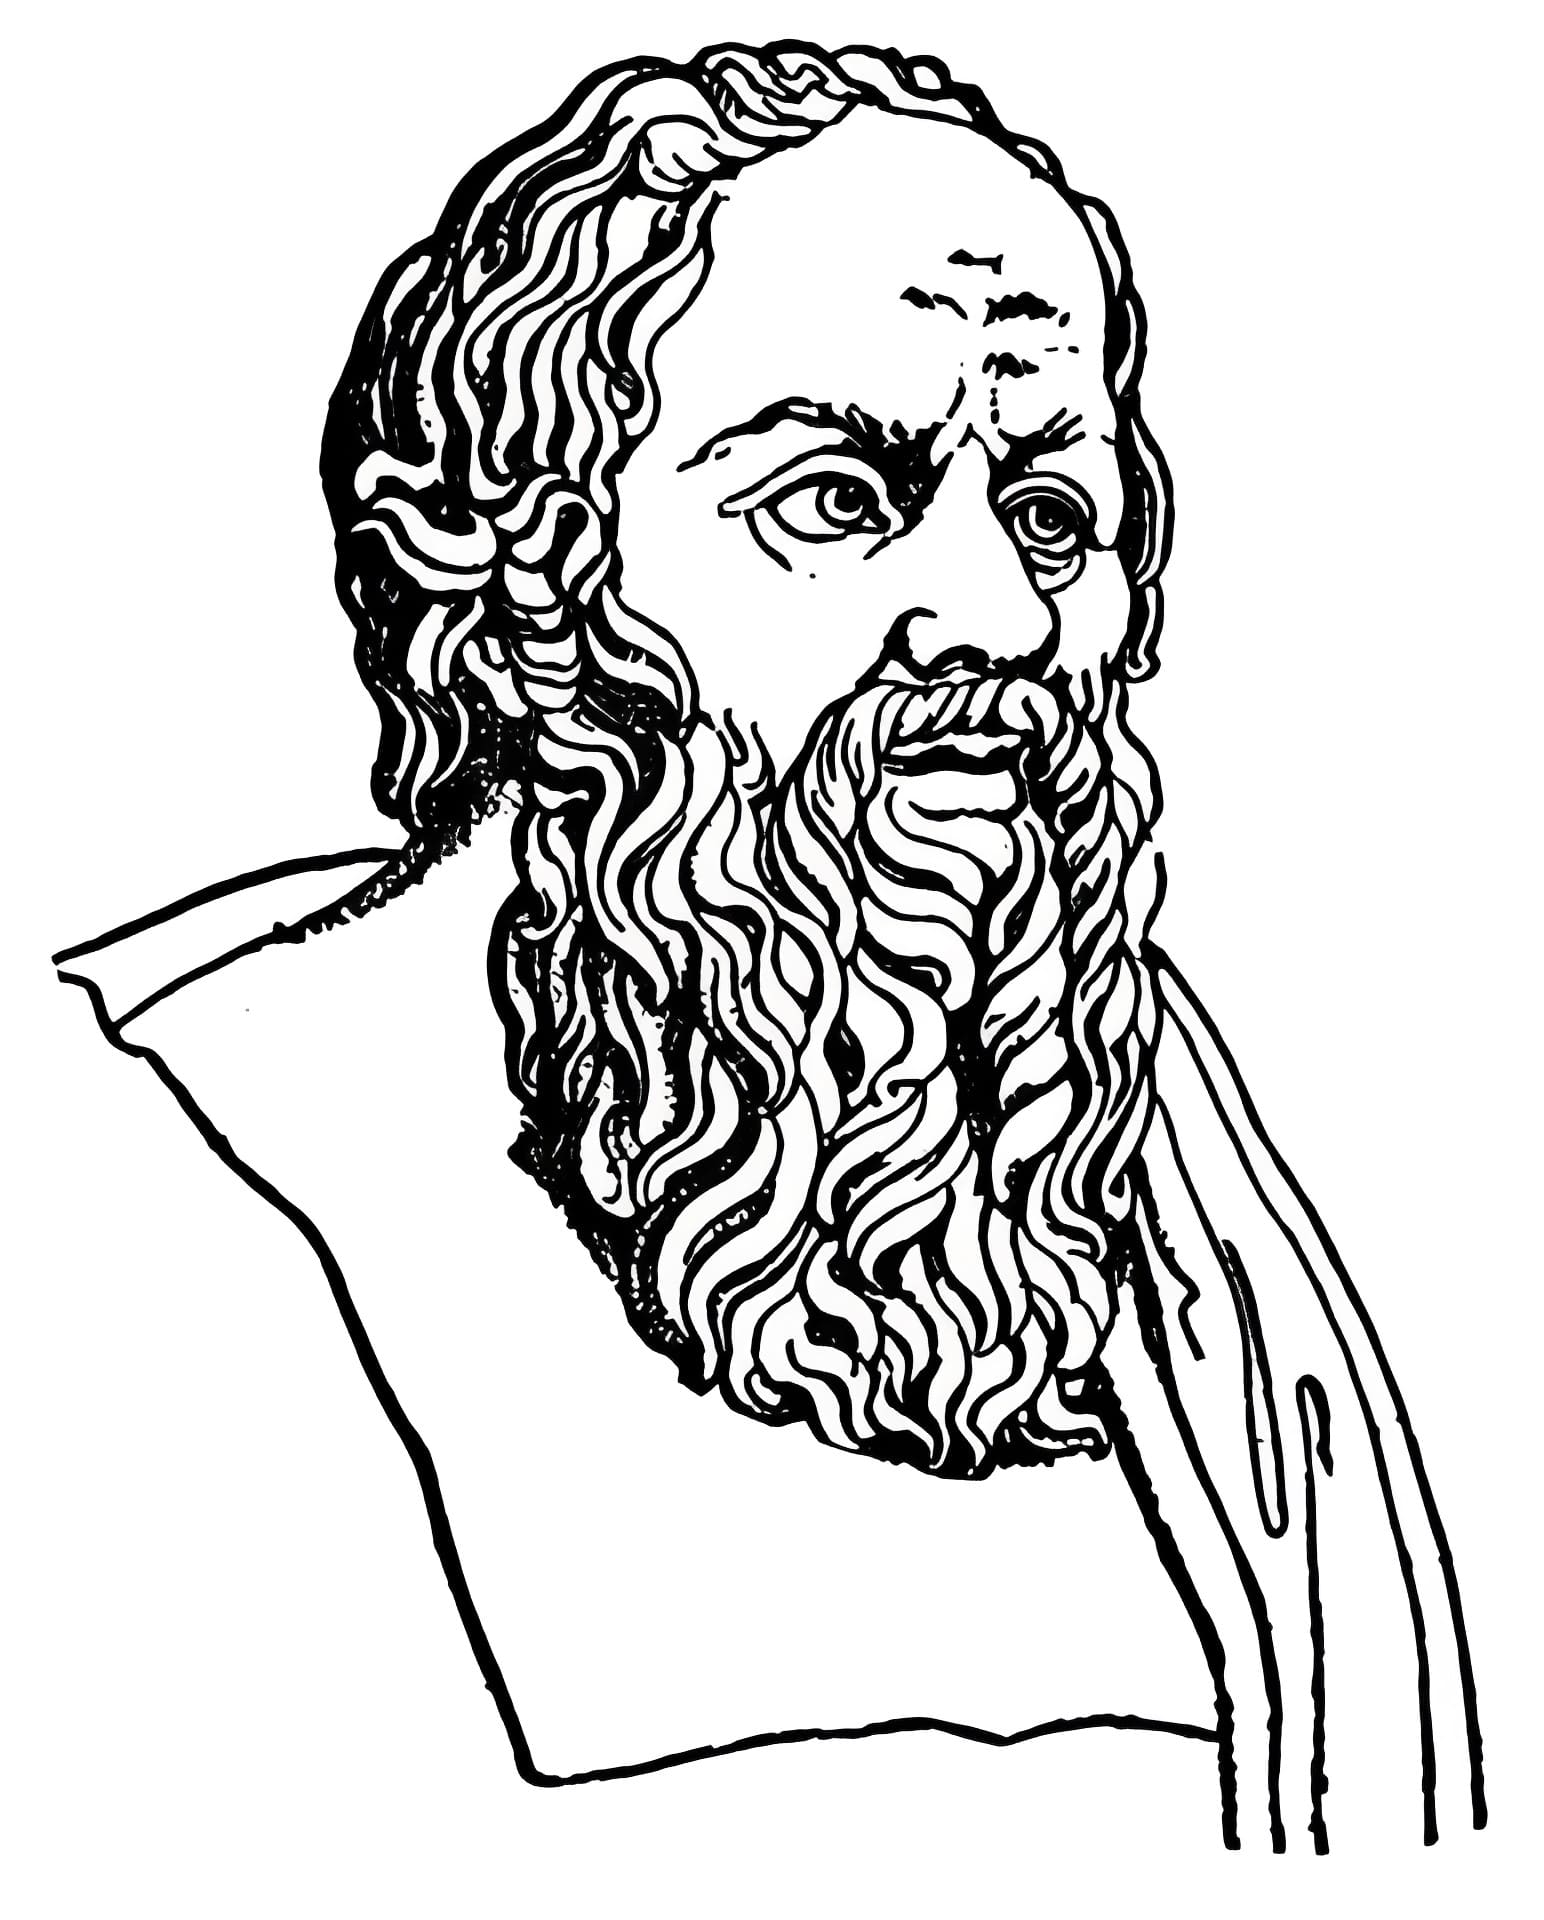 Socrates coloring page - Download, Print or Color Online for Free